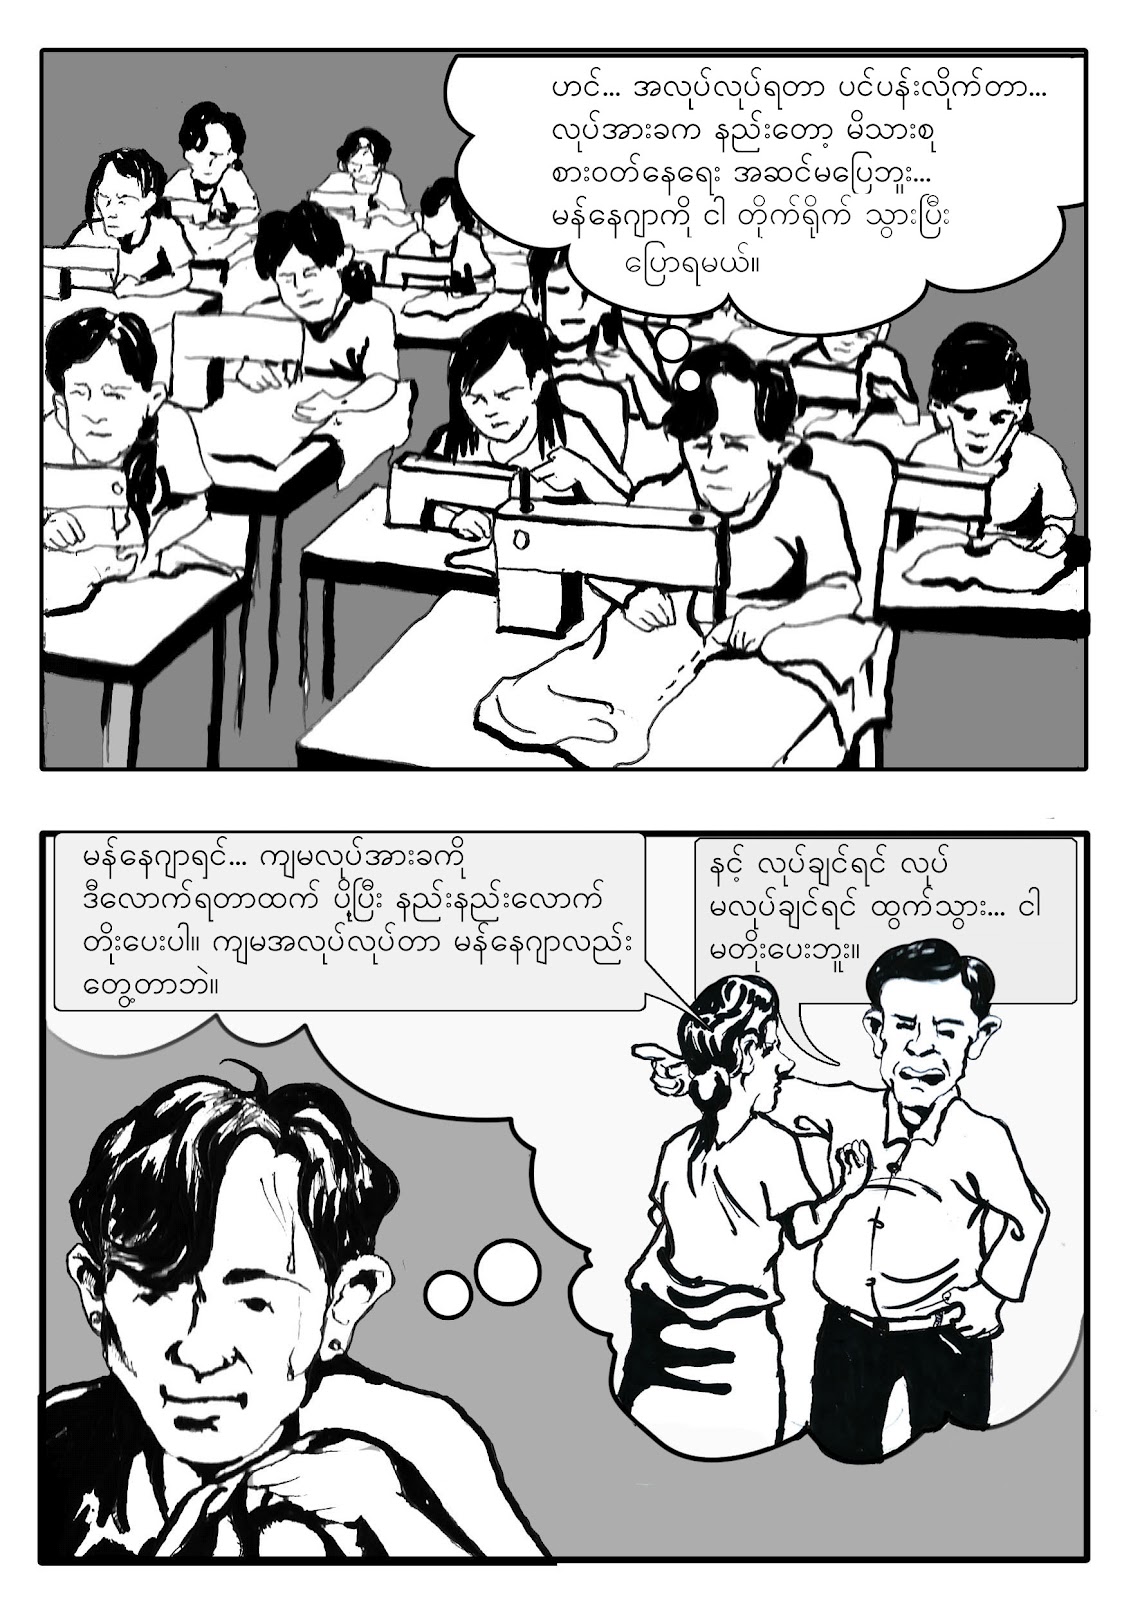 Myanmar Labour Notes: A workplace organising comic